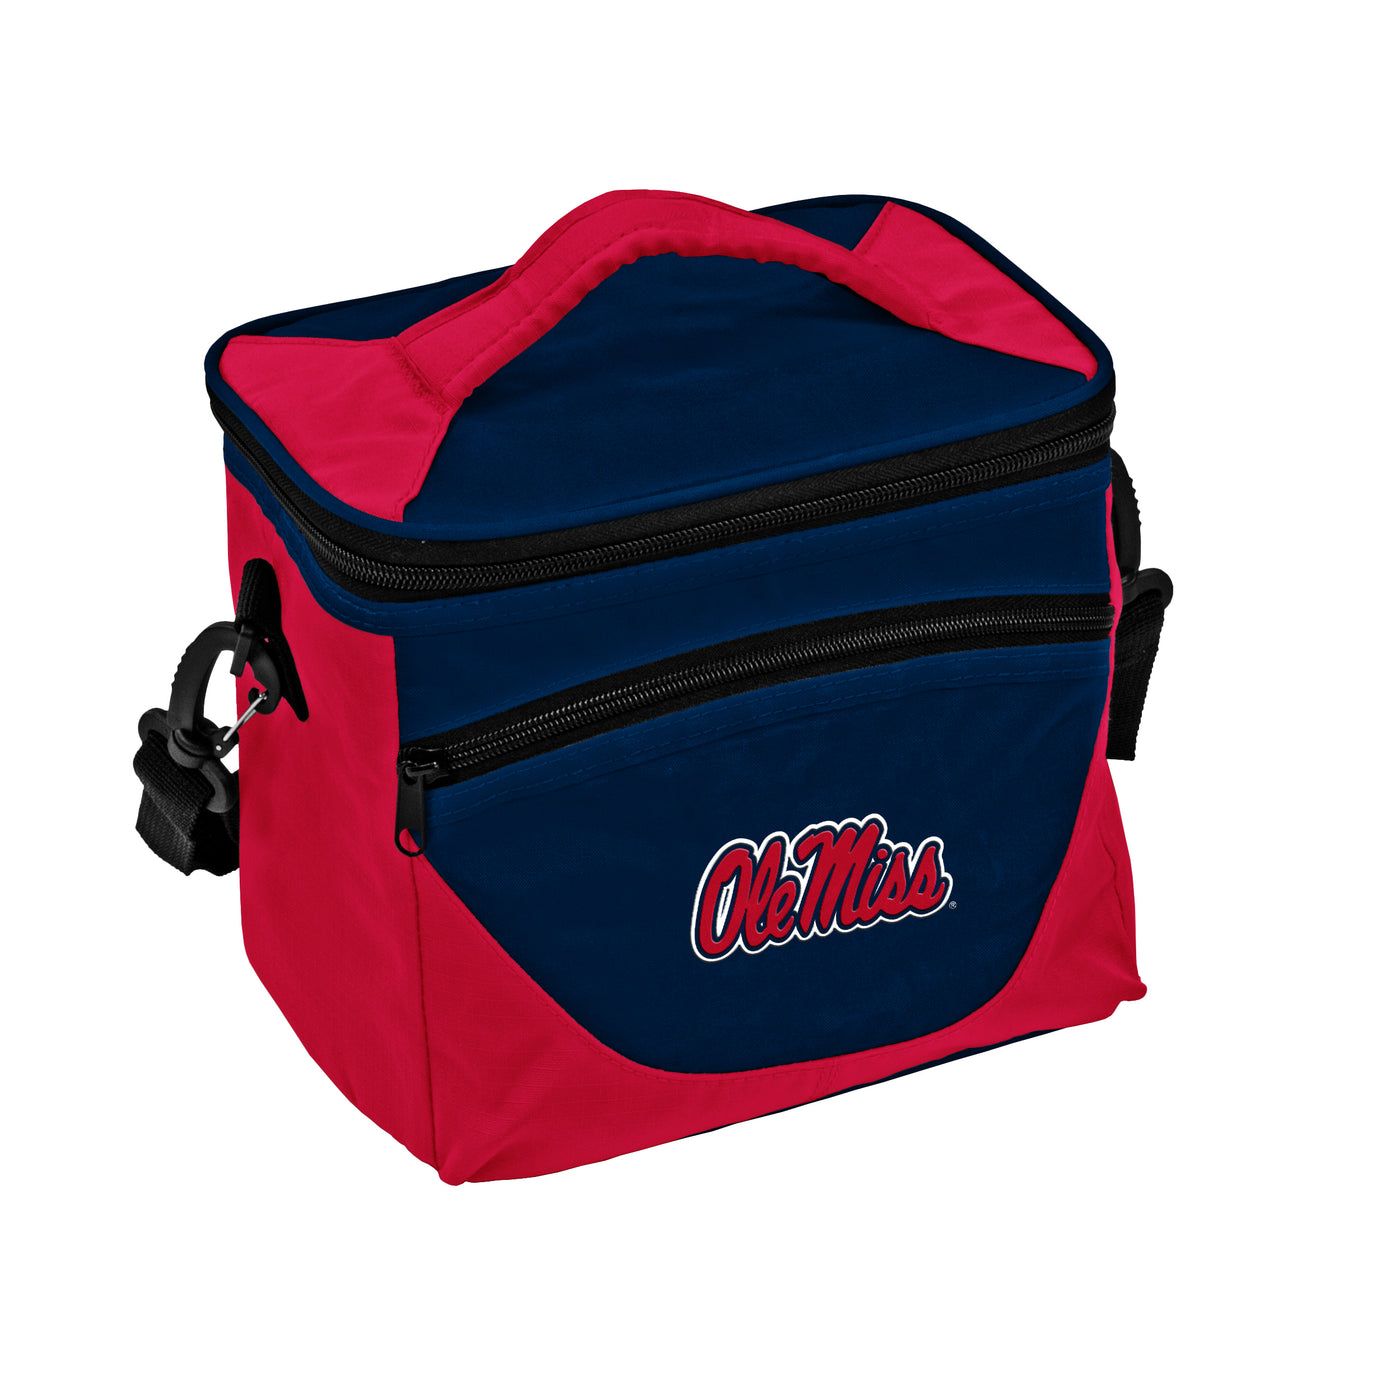 Ole Miss Halftime Lunch Cooler